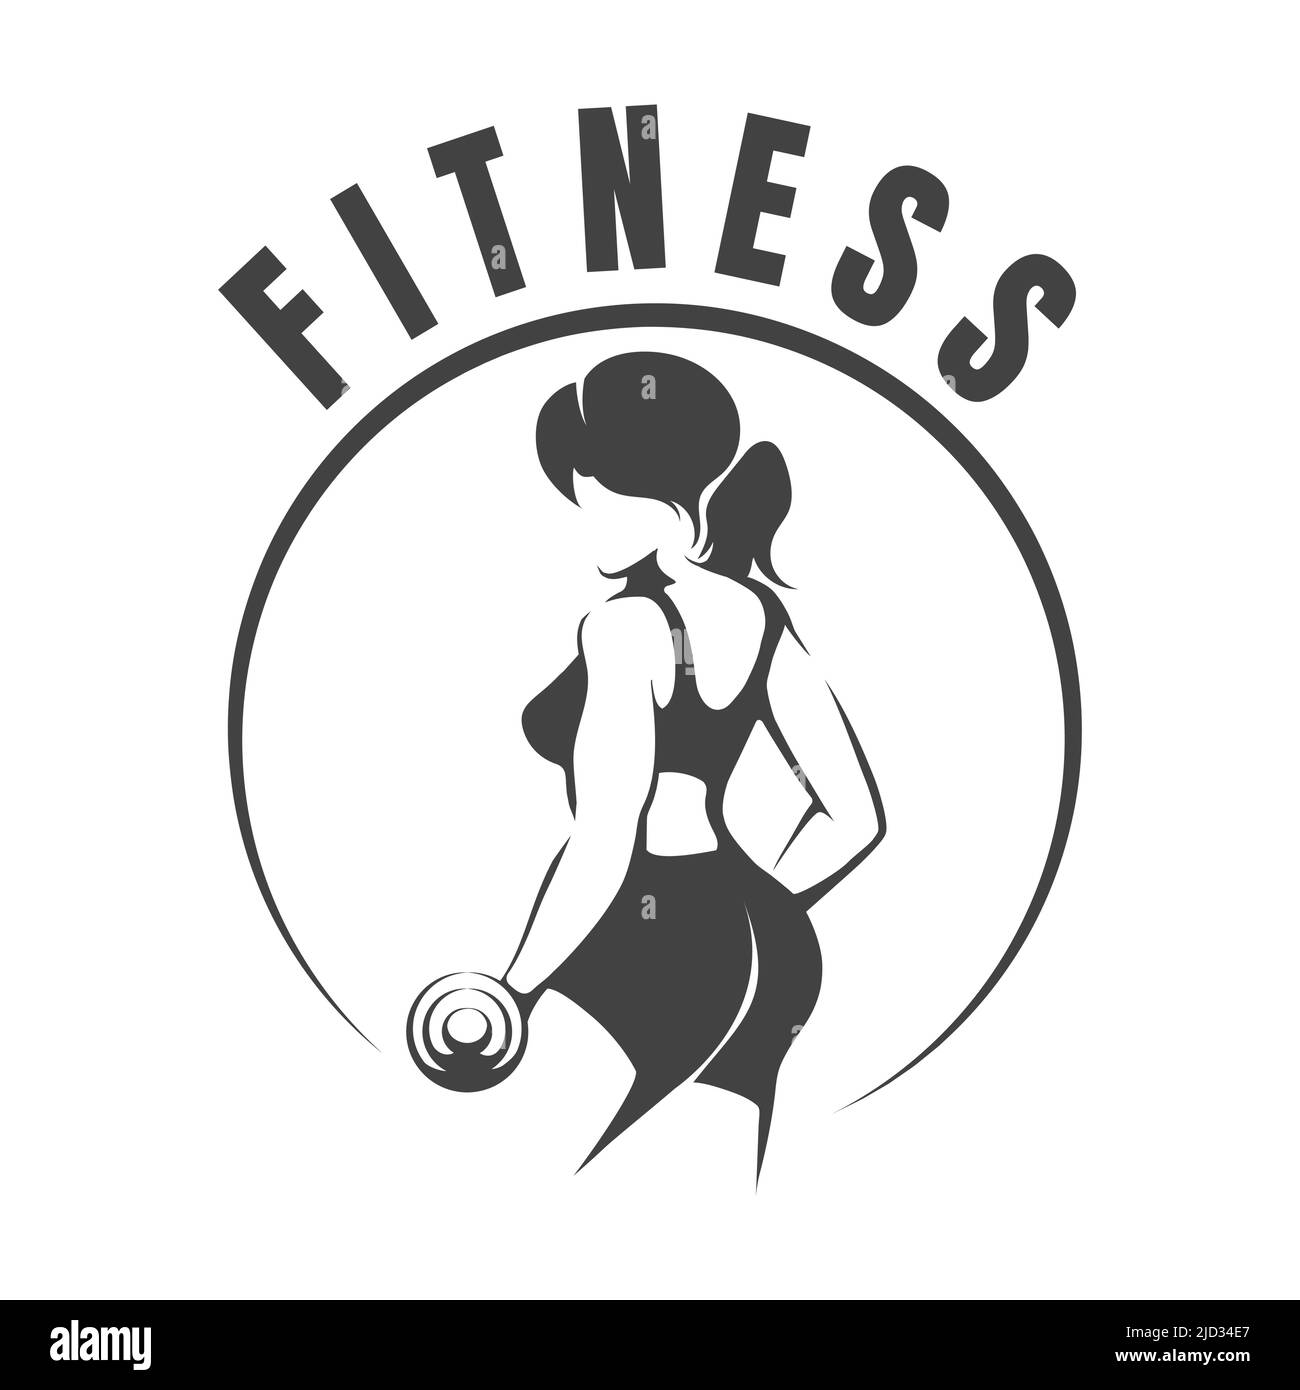 Fitness club logo or emblem with woman silhouette. Woman holds dumbbells. Isolated on white background. Vector Illustration. Stock Vector